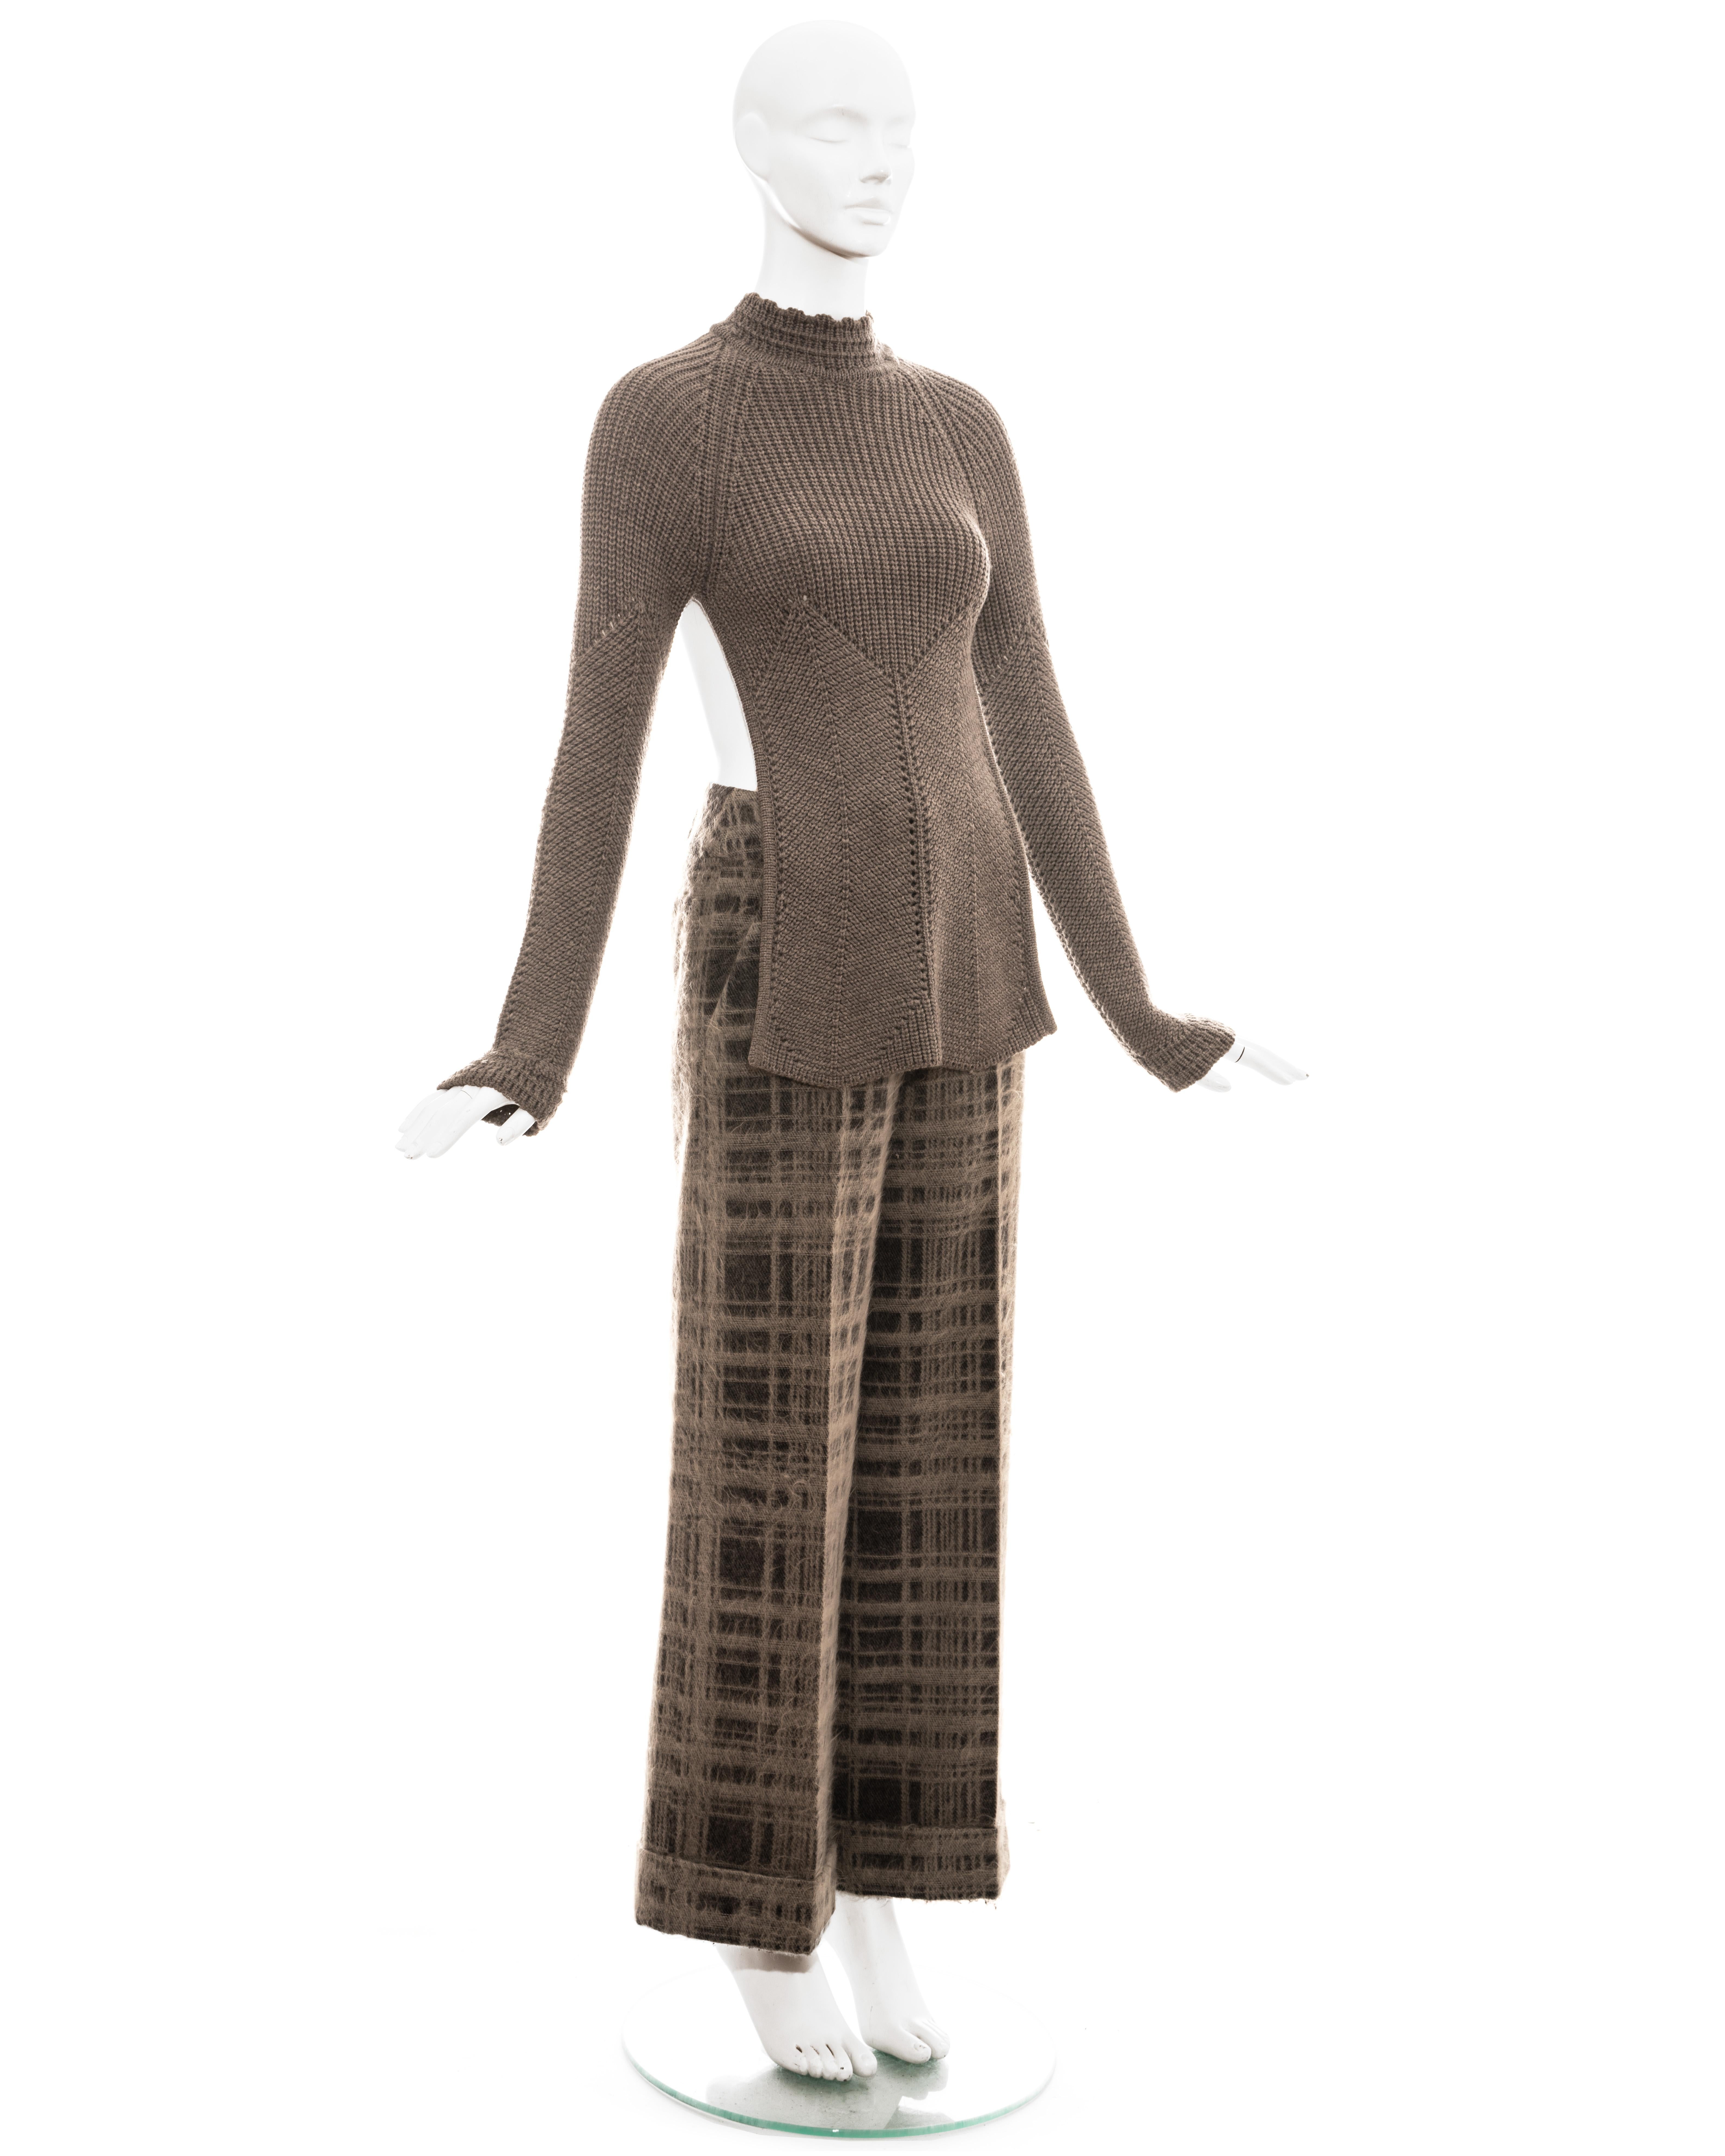 Alexander McQueen grey knitted backless sweater and checked mohair wide-leg pants.

Fall-Winter 1999